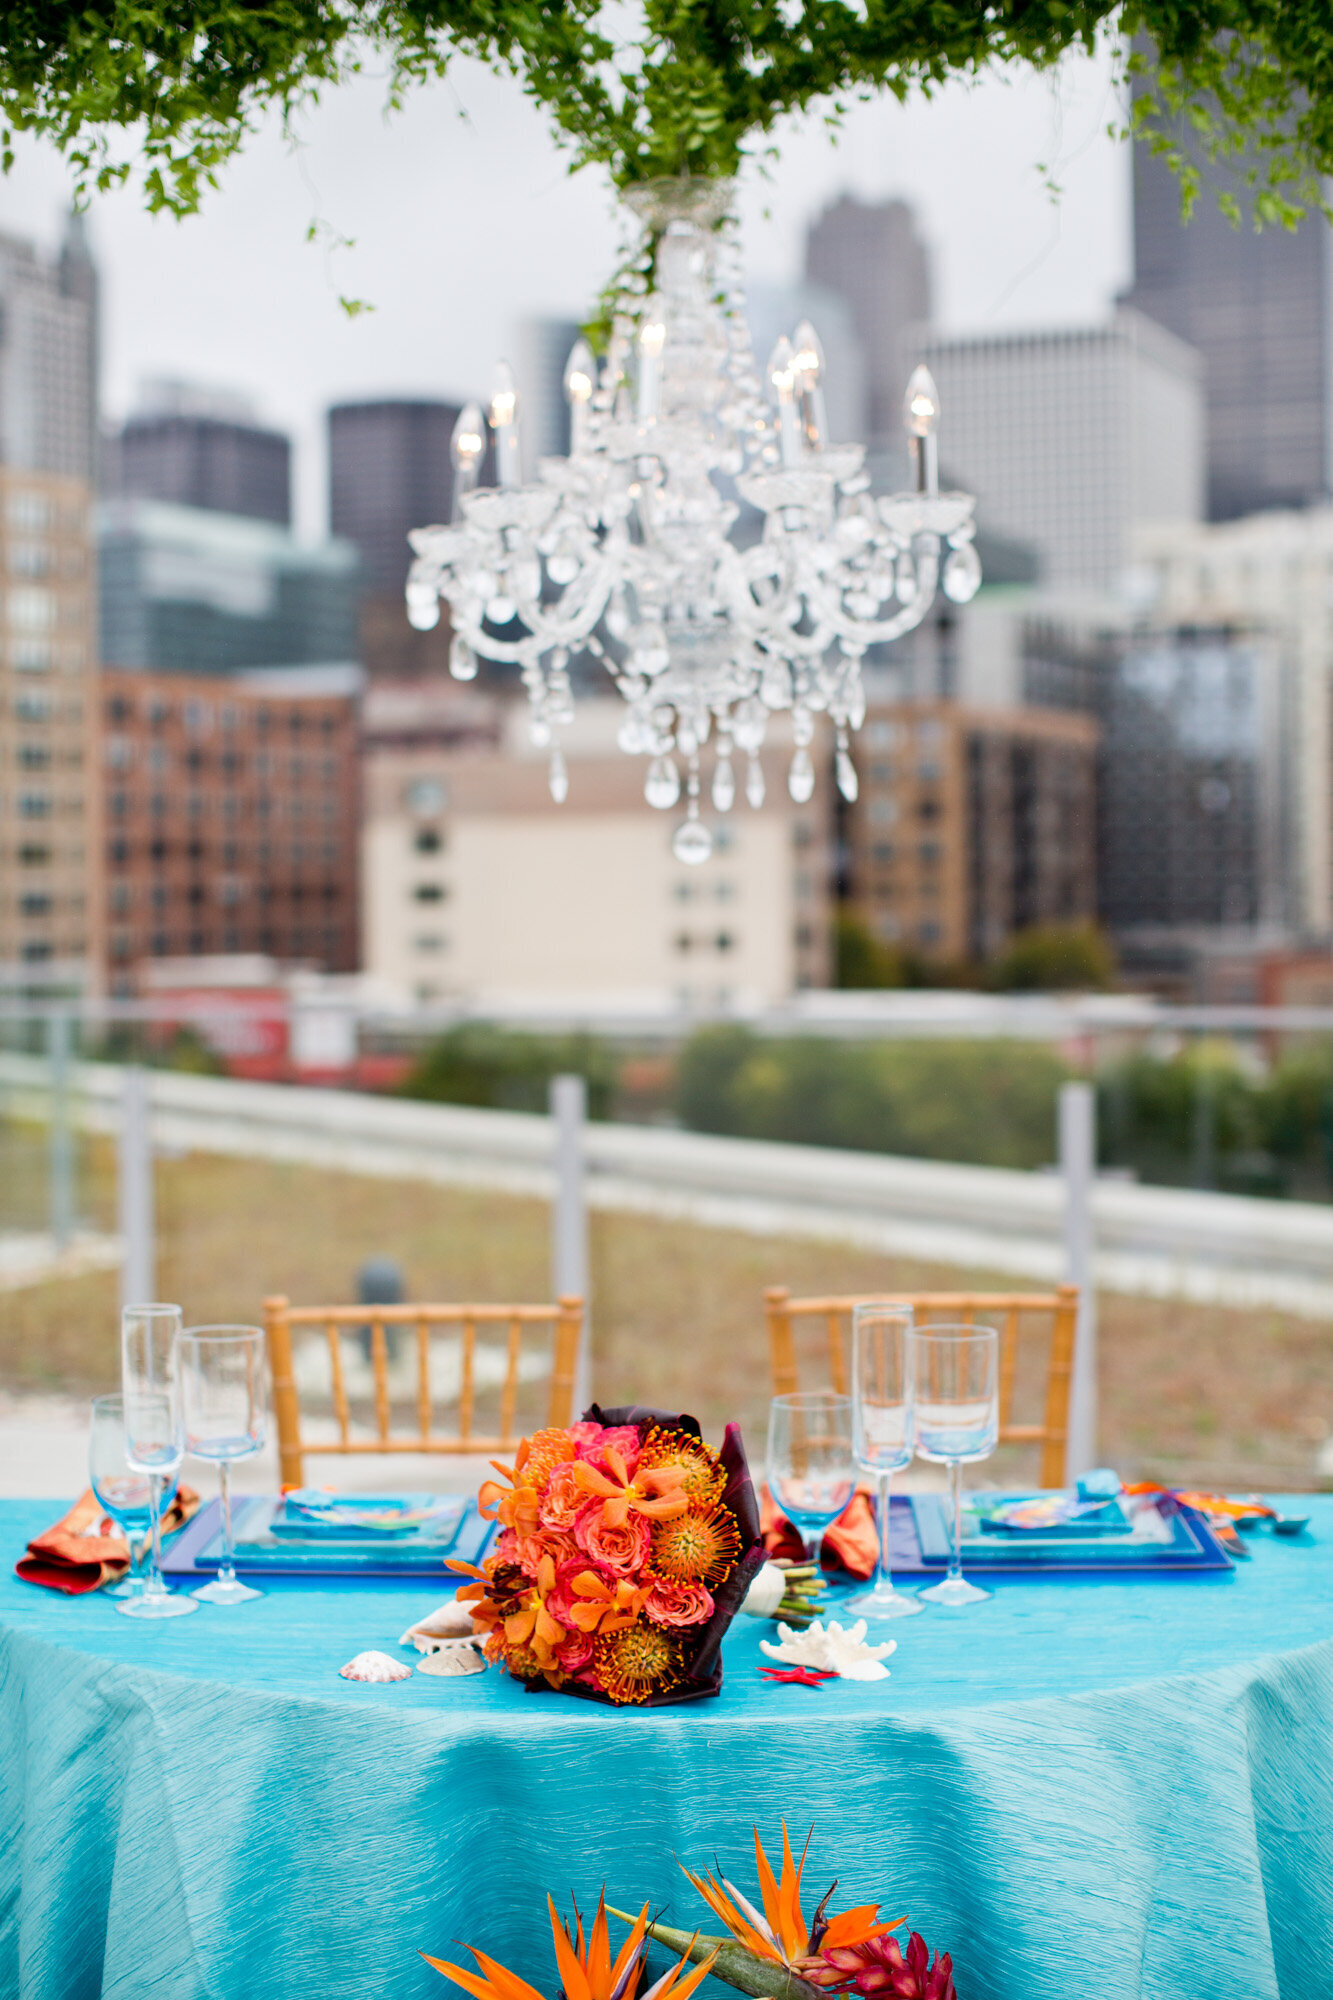 Wedding reception round table for newly married couple with blue cloth, golden chairs, floral centerpiece and chandelier on top